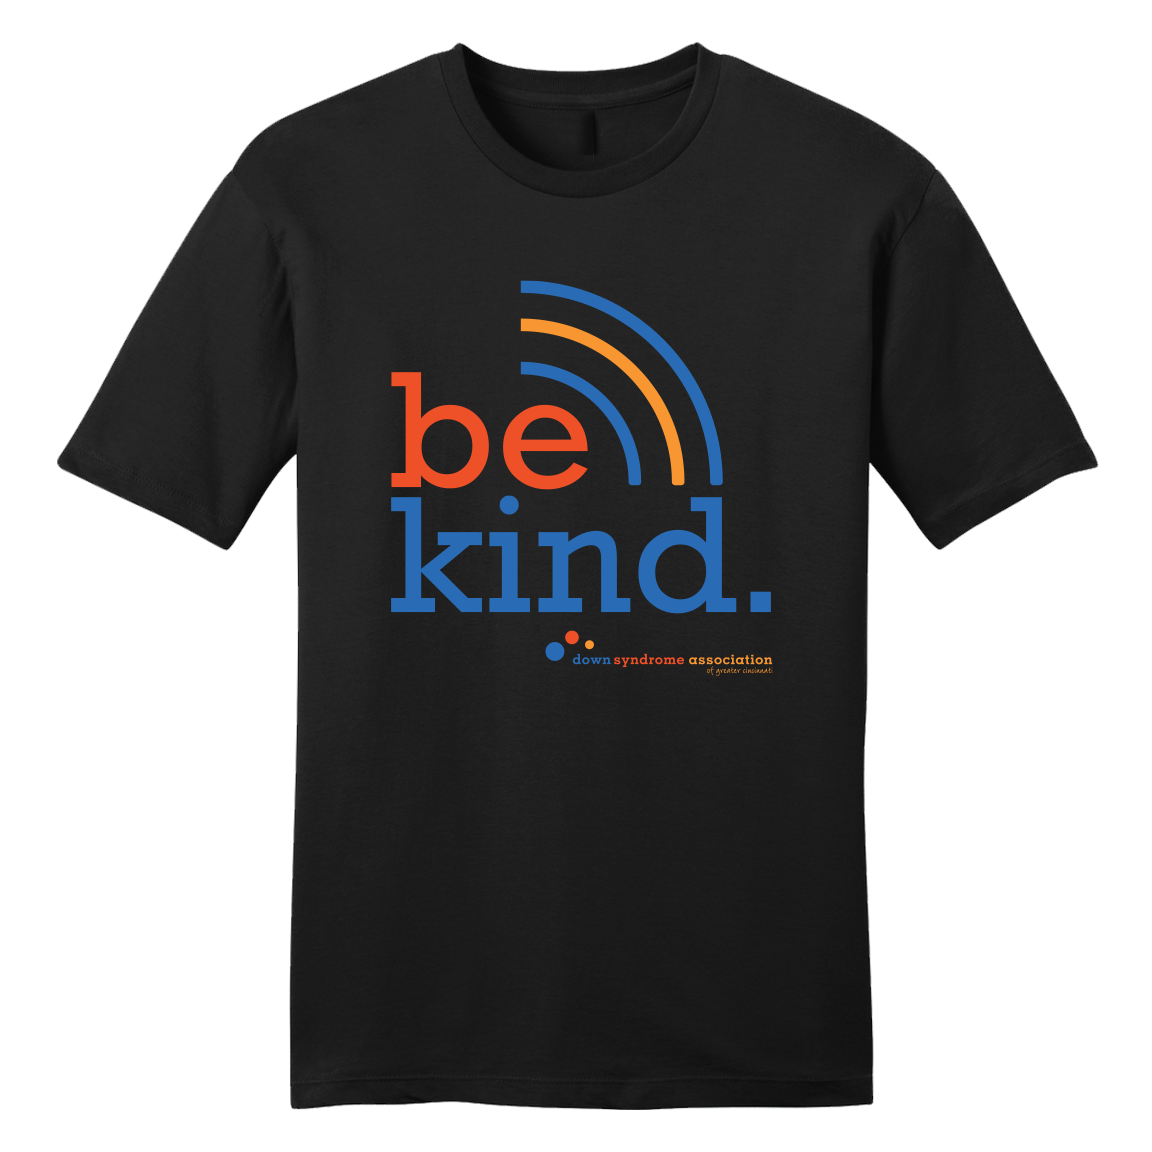 Be Kind Down Syndrome Association - Cincy Shirts